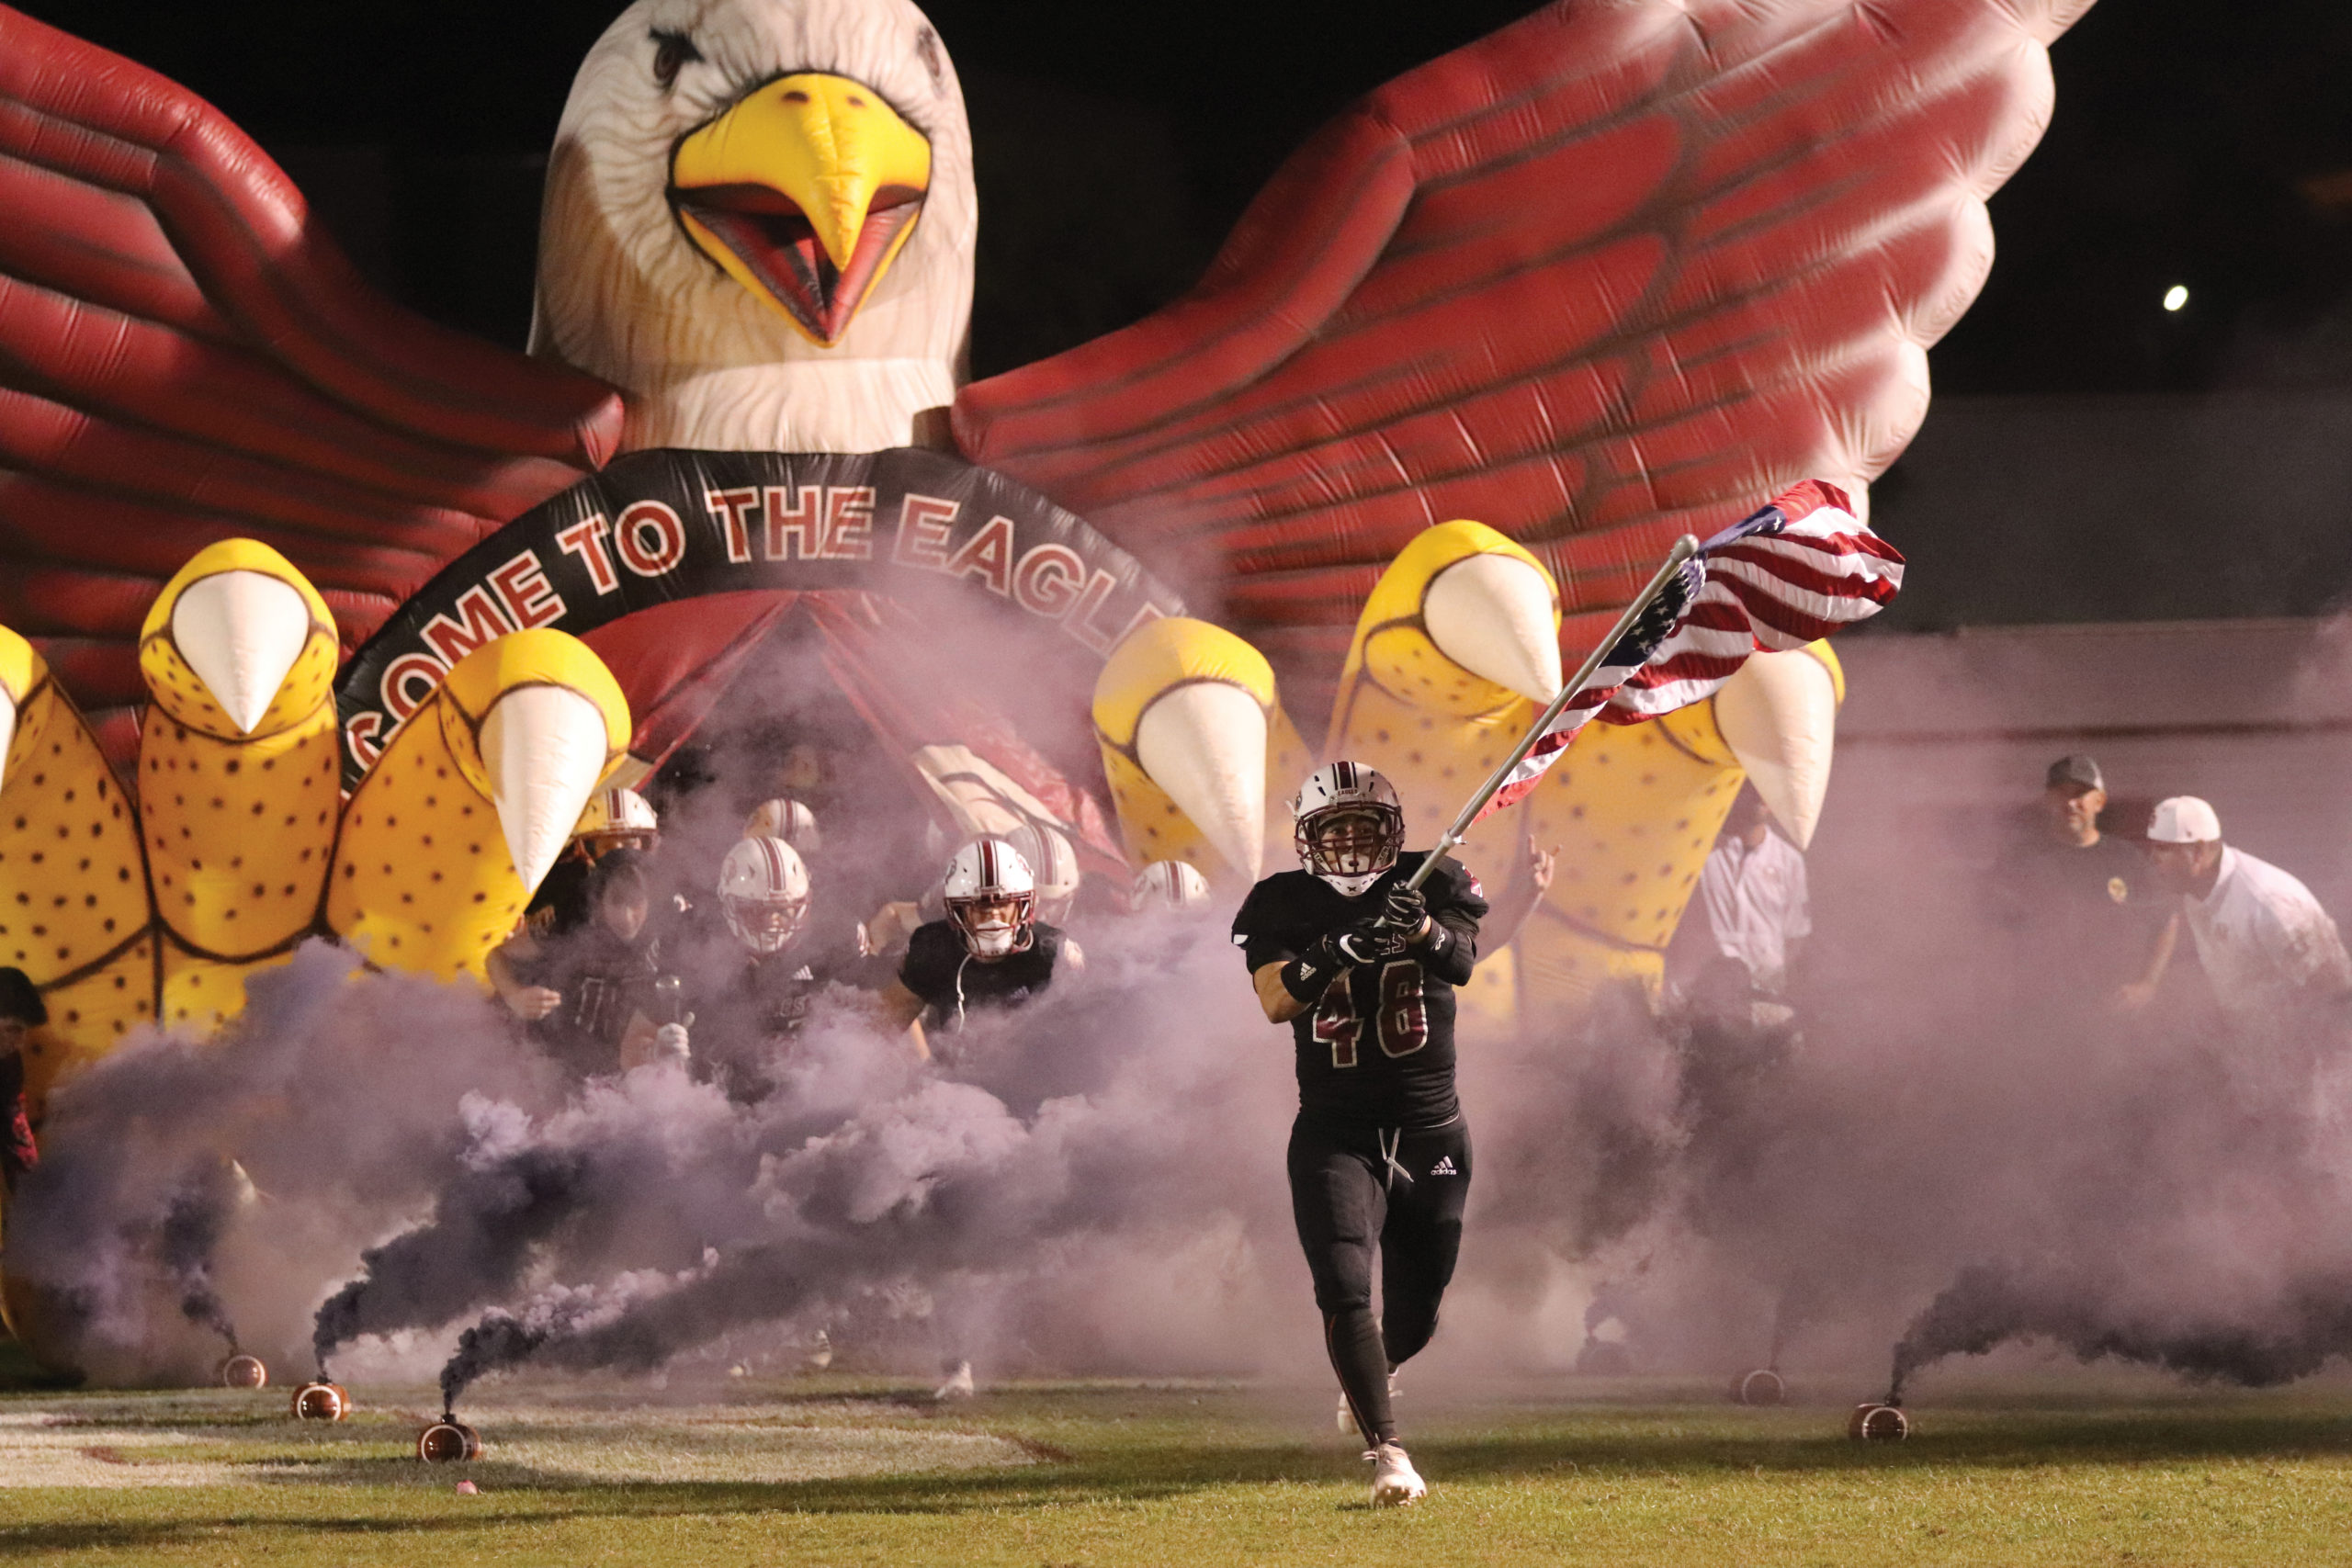 Devastating Defeat. MSD’s football team takes on Plantation High School during the senior night game on Friday, Nov. 1 at Cumber Stadium at 7 p.m. The Eagles lost to the Colonels 39-10. Photo by Jenna Harris